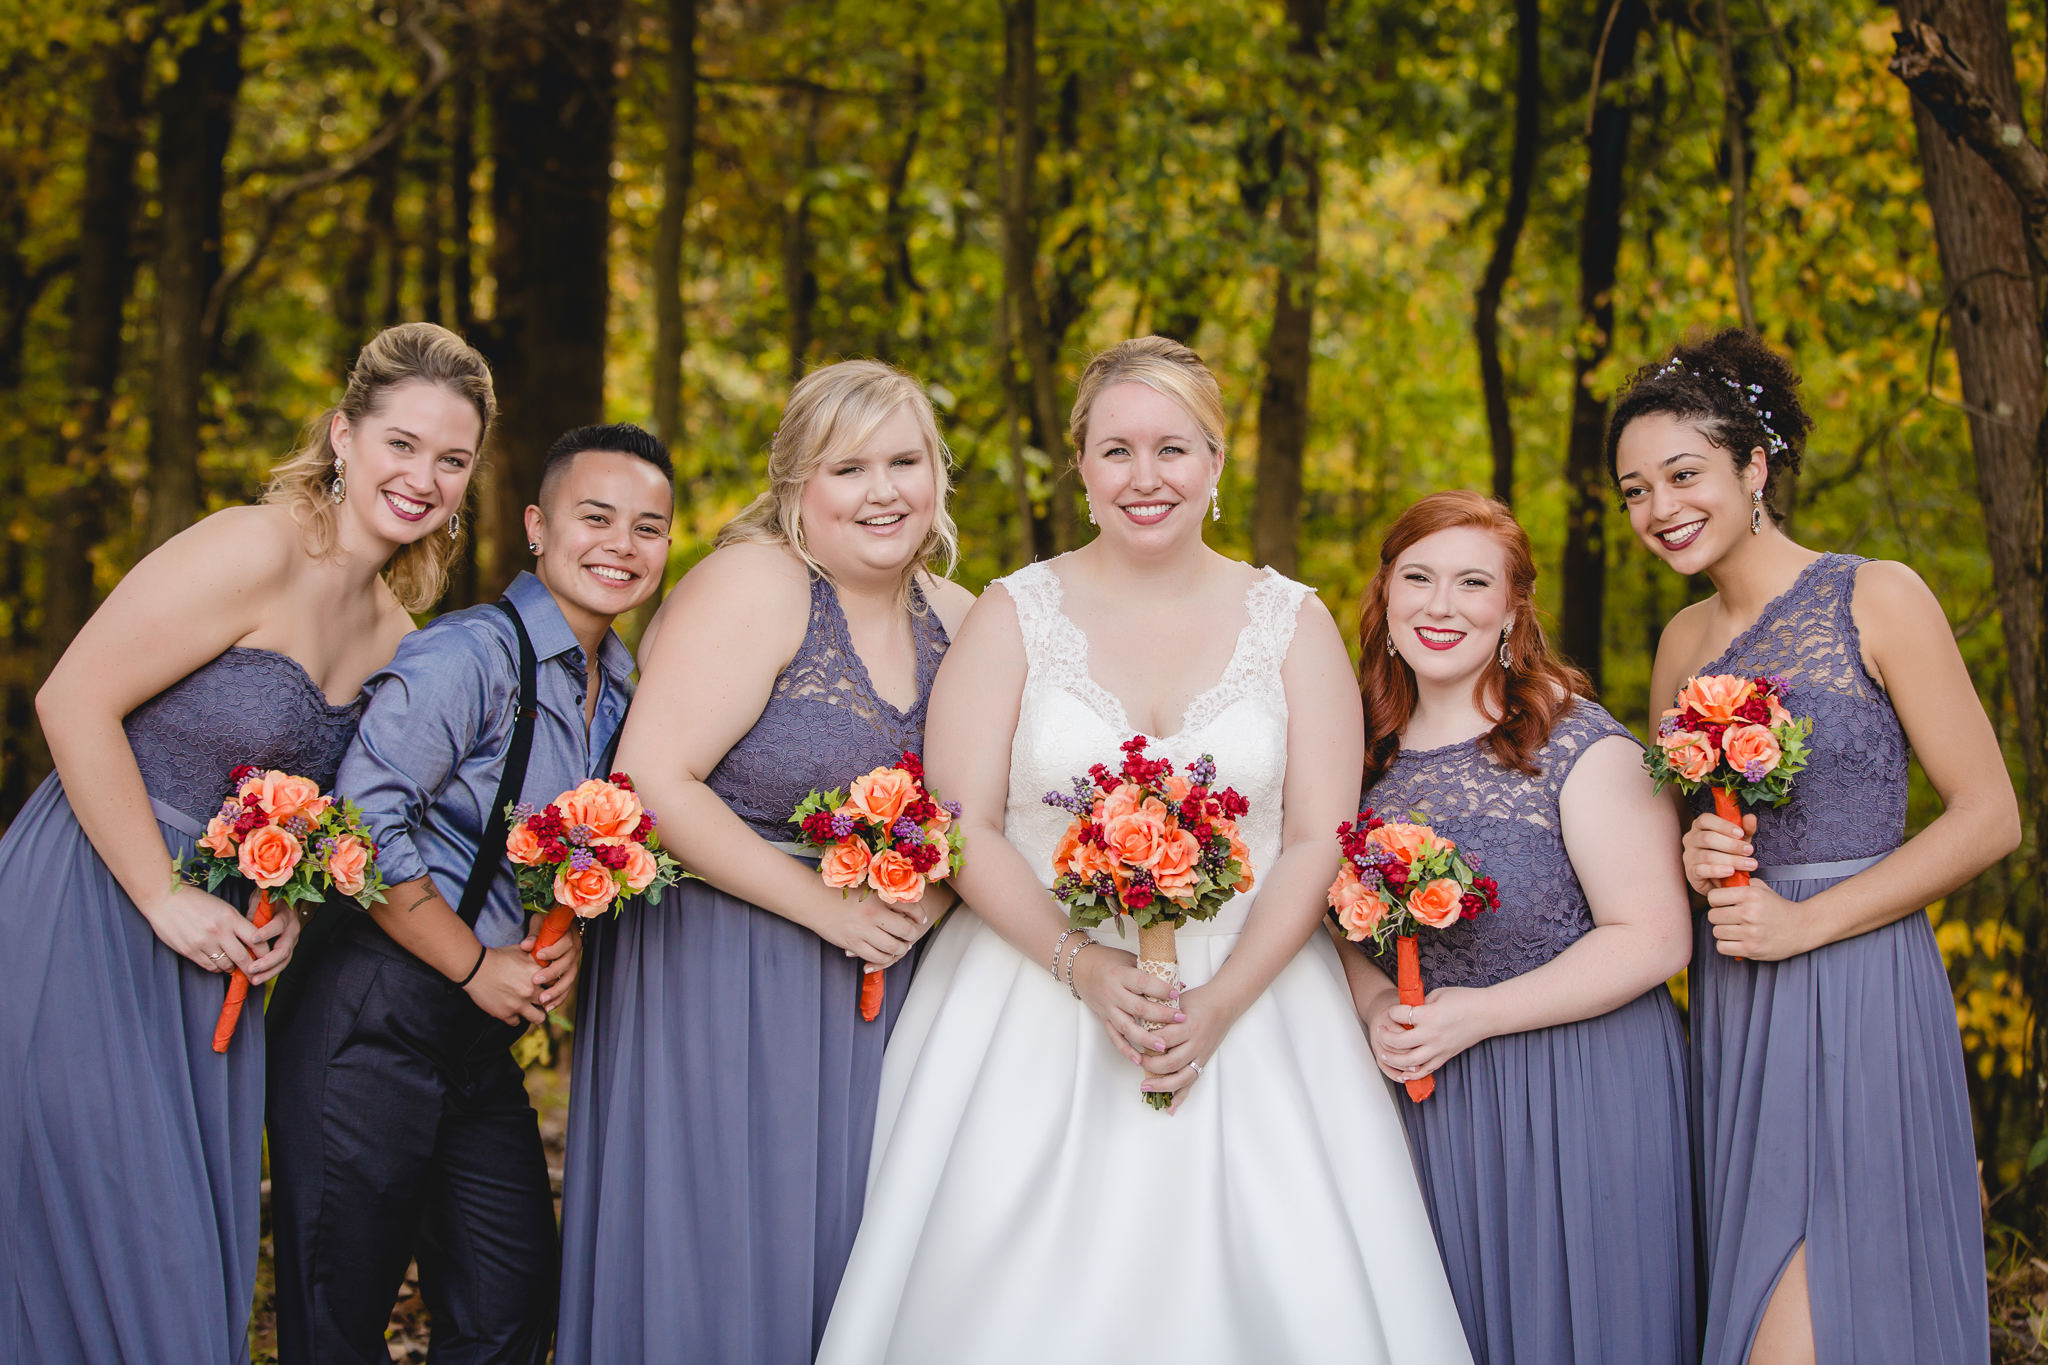 Bride and her bridesmaids with gray dresses from David's Bridal